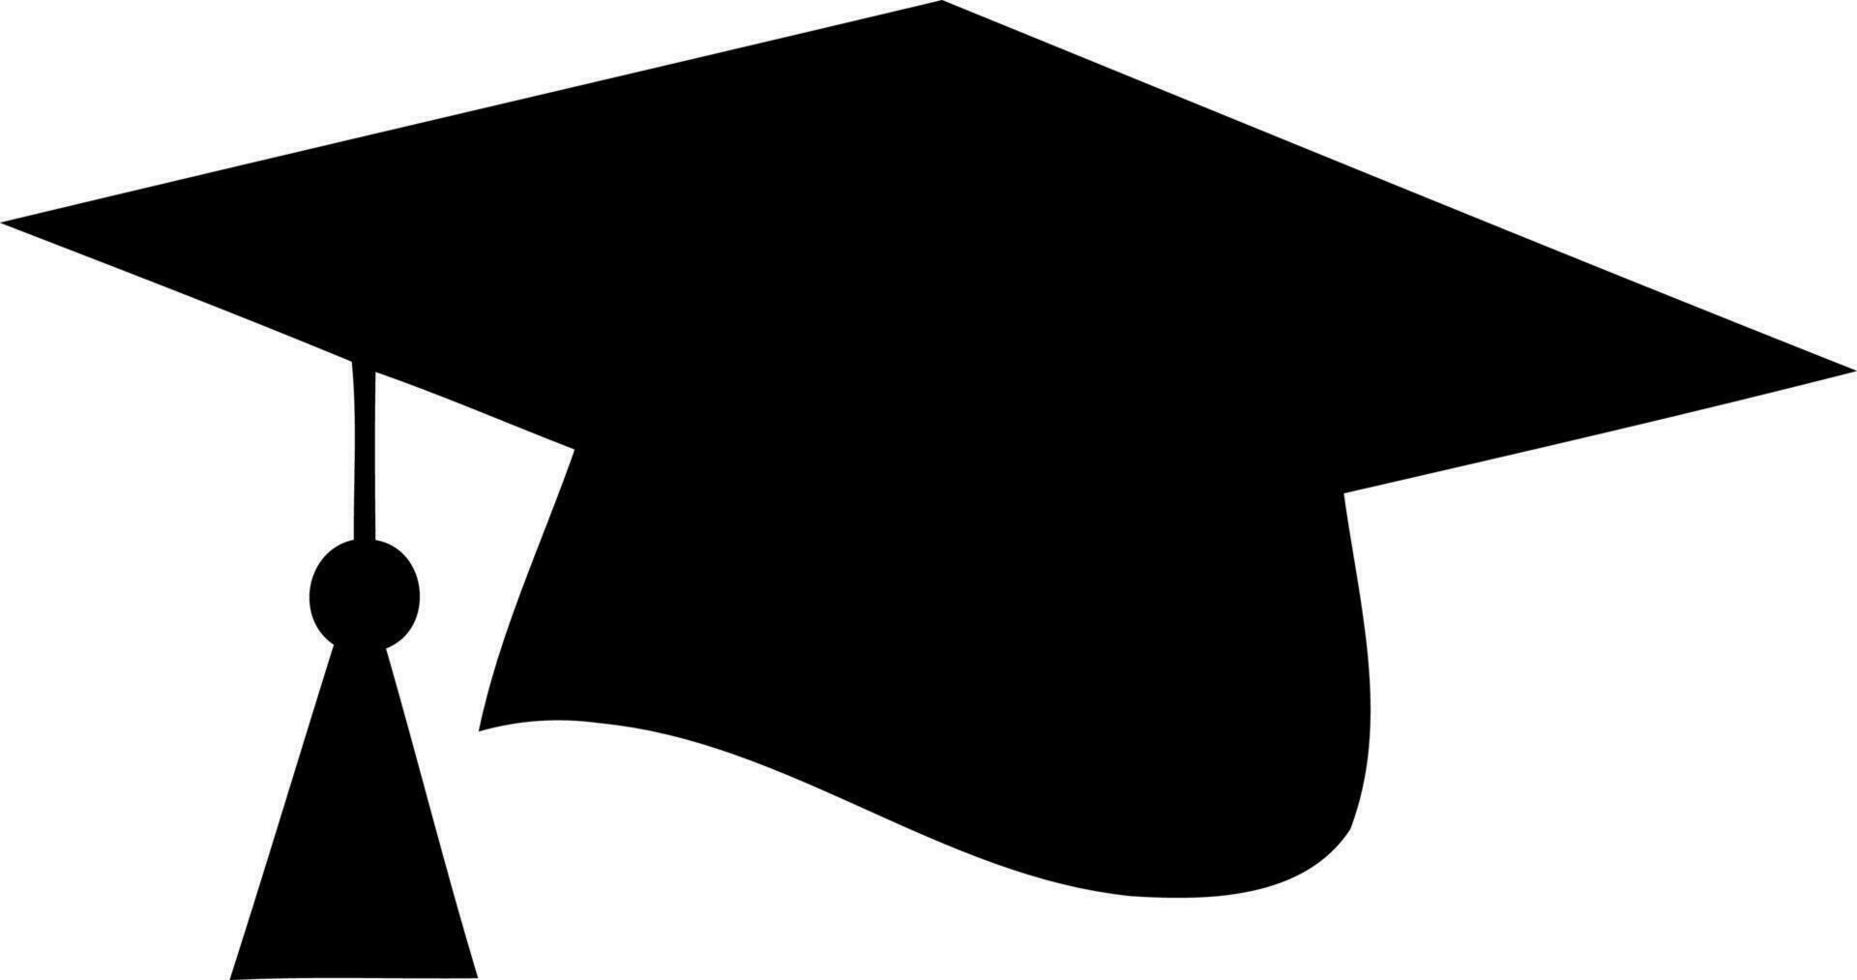 graduation hat gown black and white silhouette vector